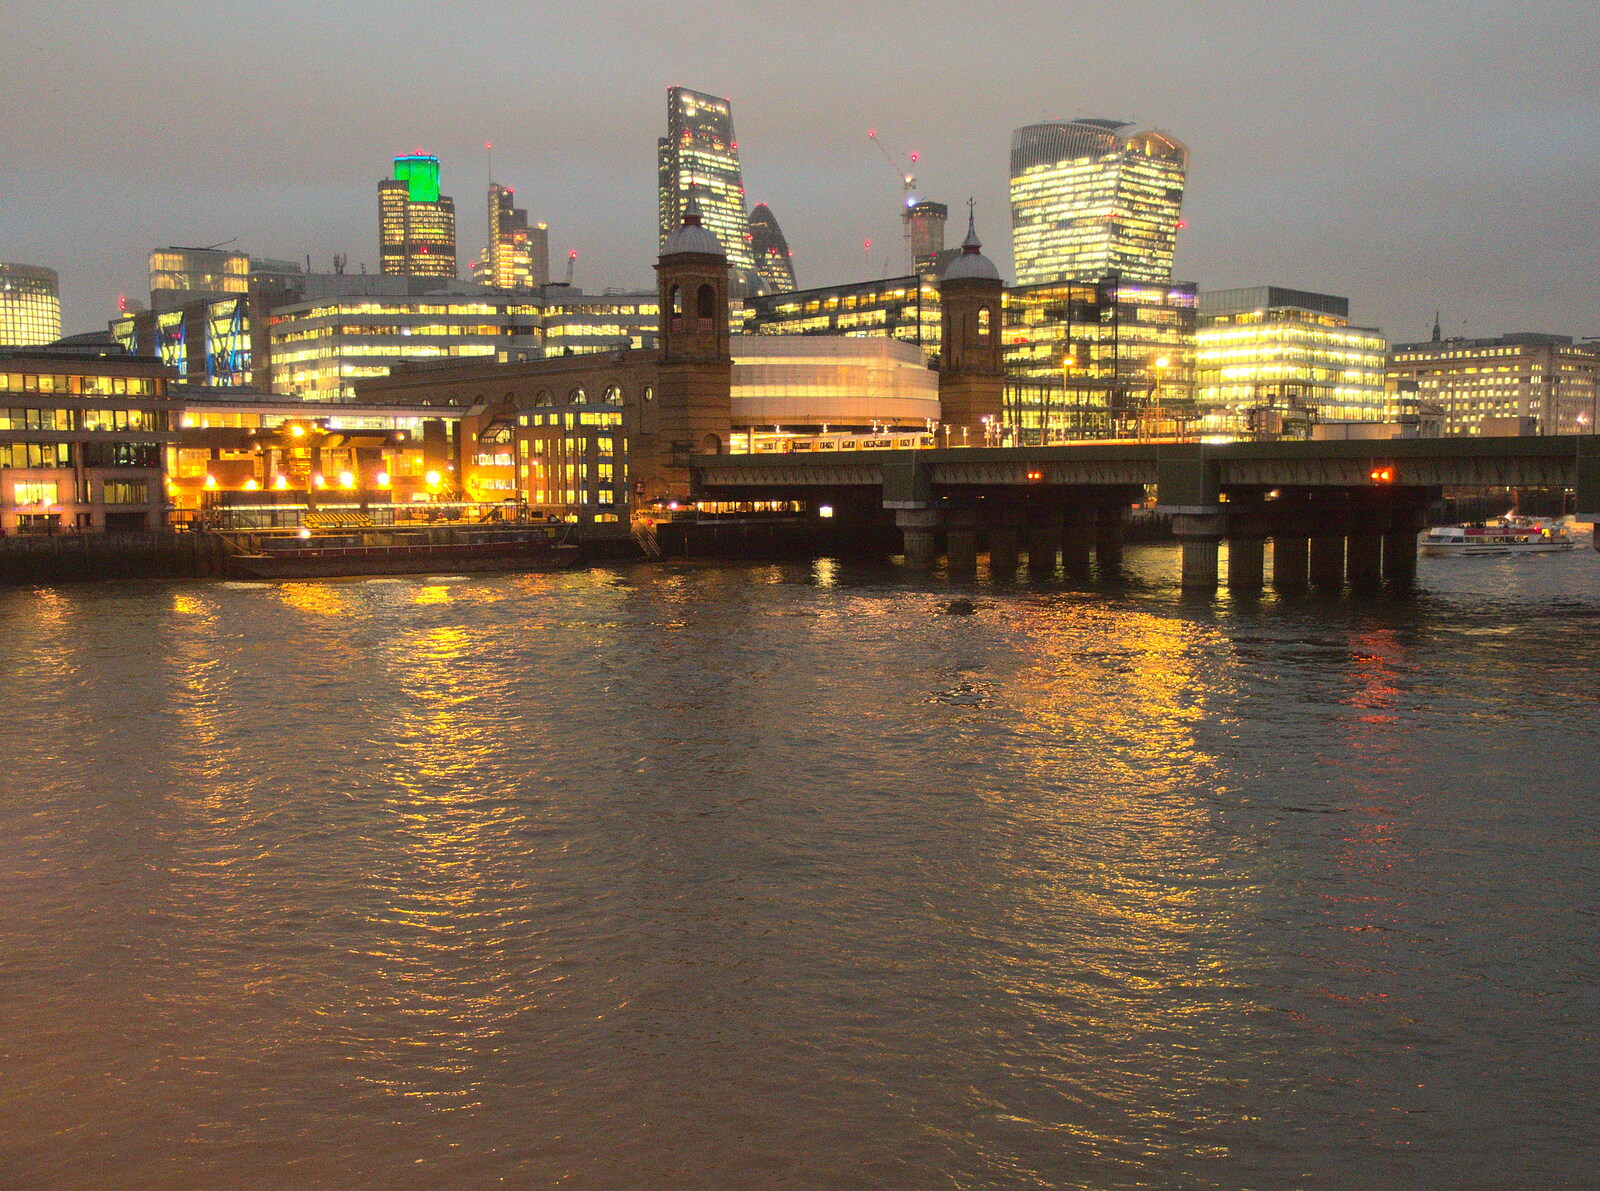 Cannon Street station and the City of London from Innovation Week and a Walk Around the South Bank, Southwark - 8th December 2016